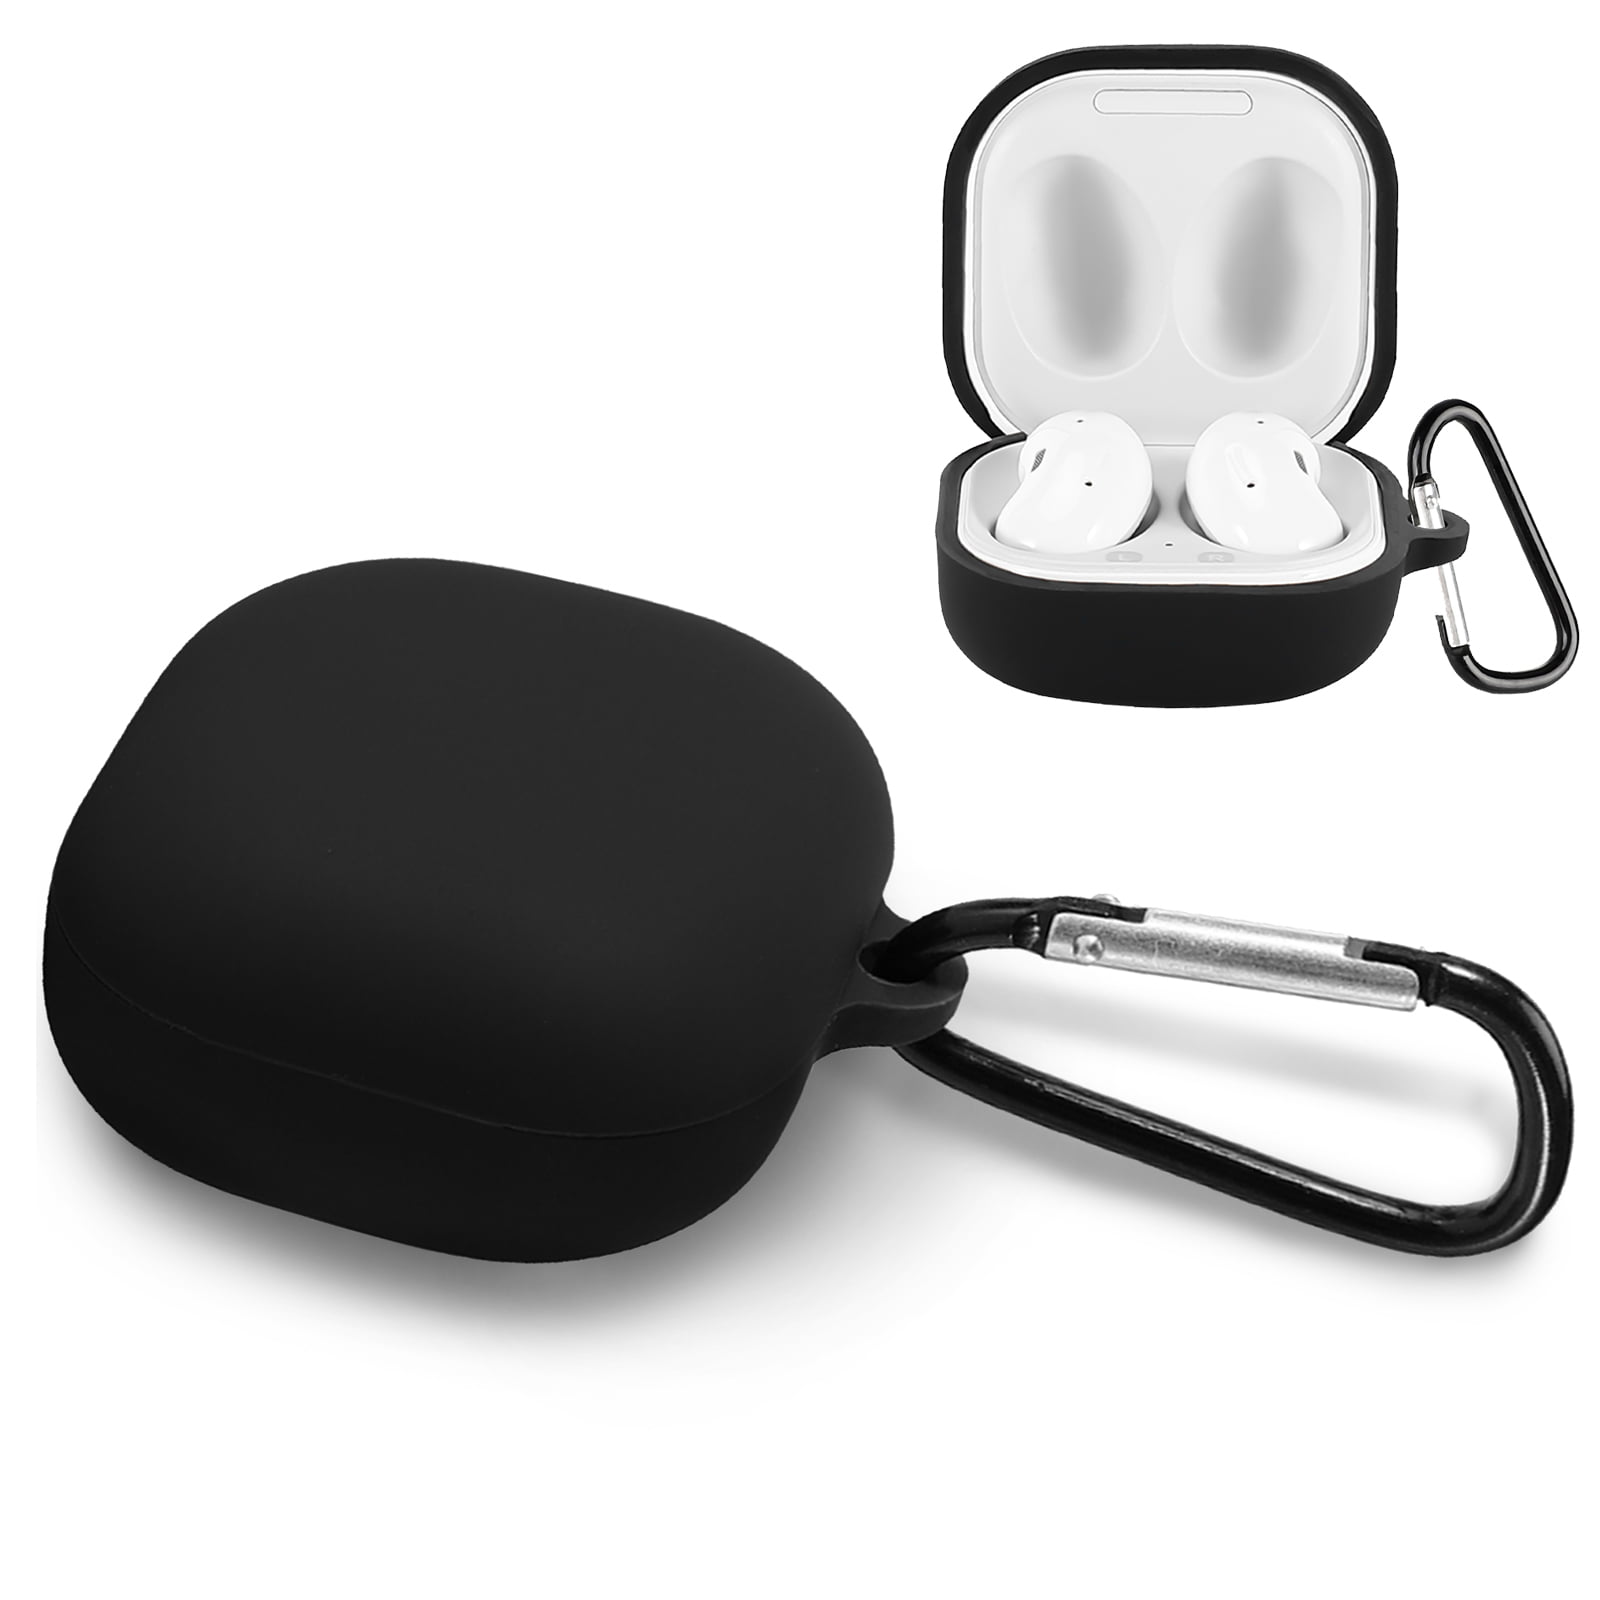 Silicone Case for Samsung Galaxy Buds Live 2020, Soft Case Cover Skin Protector with Carabiner